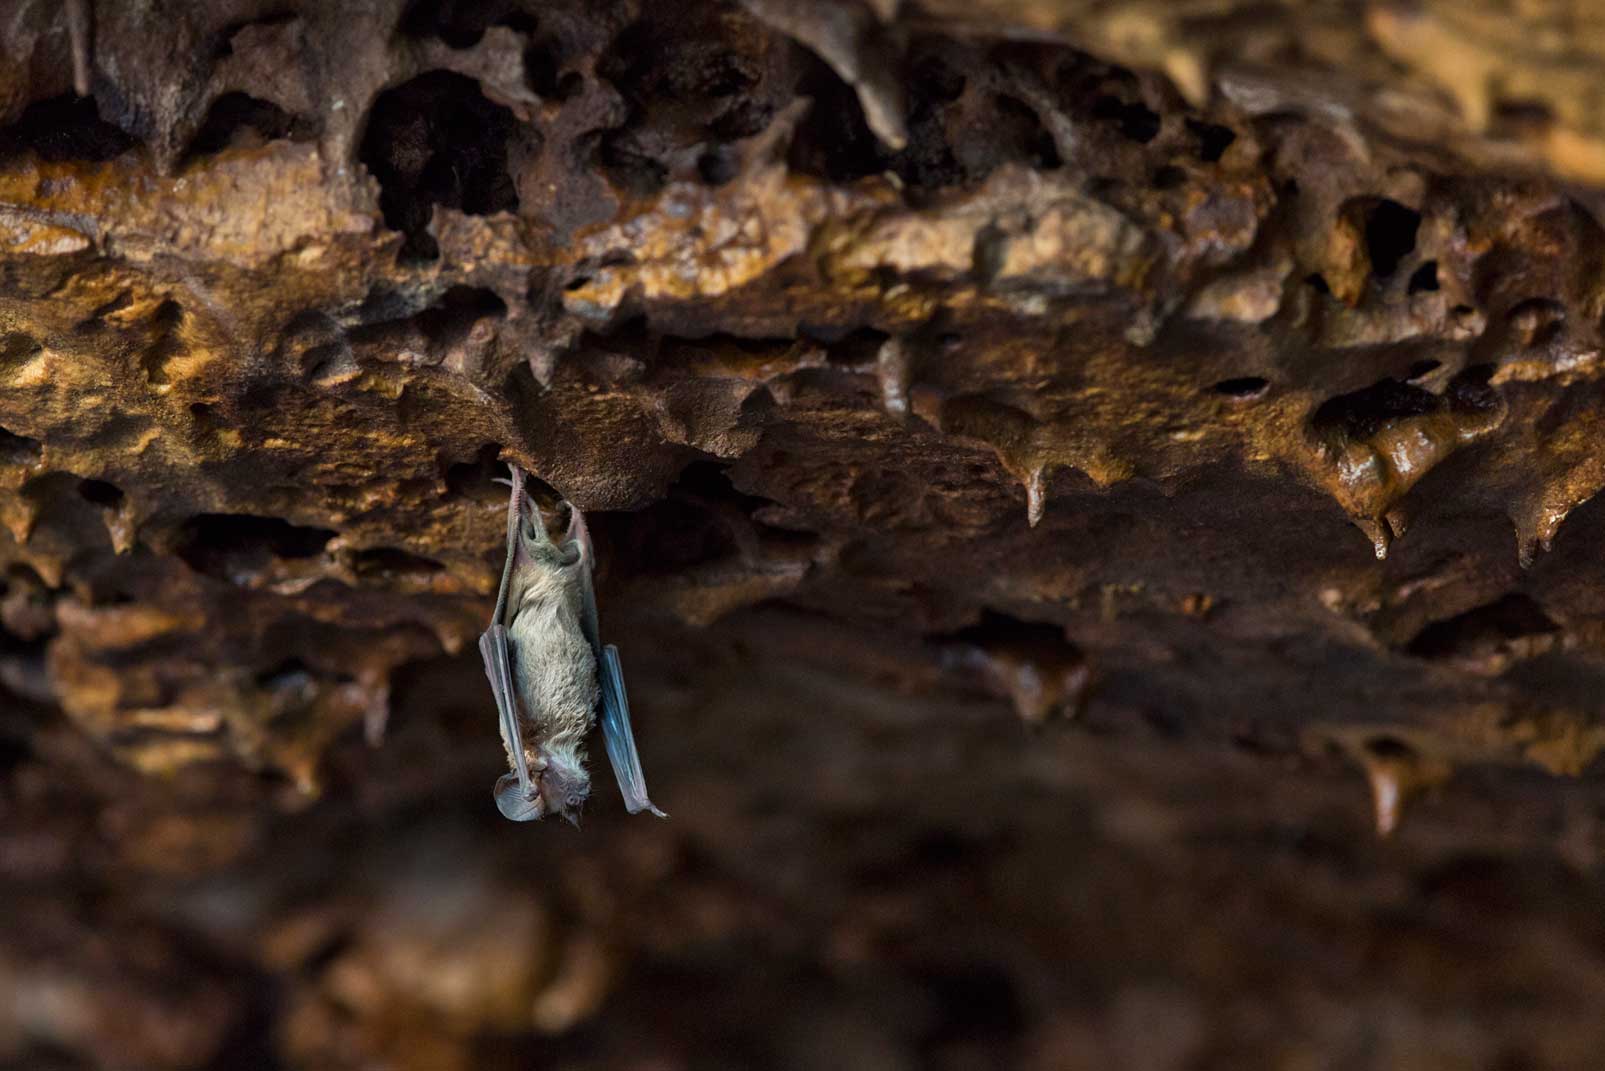 Bats arrive at Bracken Cave in March from Mexico, where they spend the winter. Before they arrive, they mate and the males form their own bachelor colonies. The pregnant females move between about a dozen caves within a 100-mile radius of San Antonio, with the largest colony inhabiting Bracken Cave.